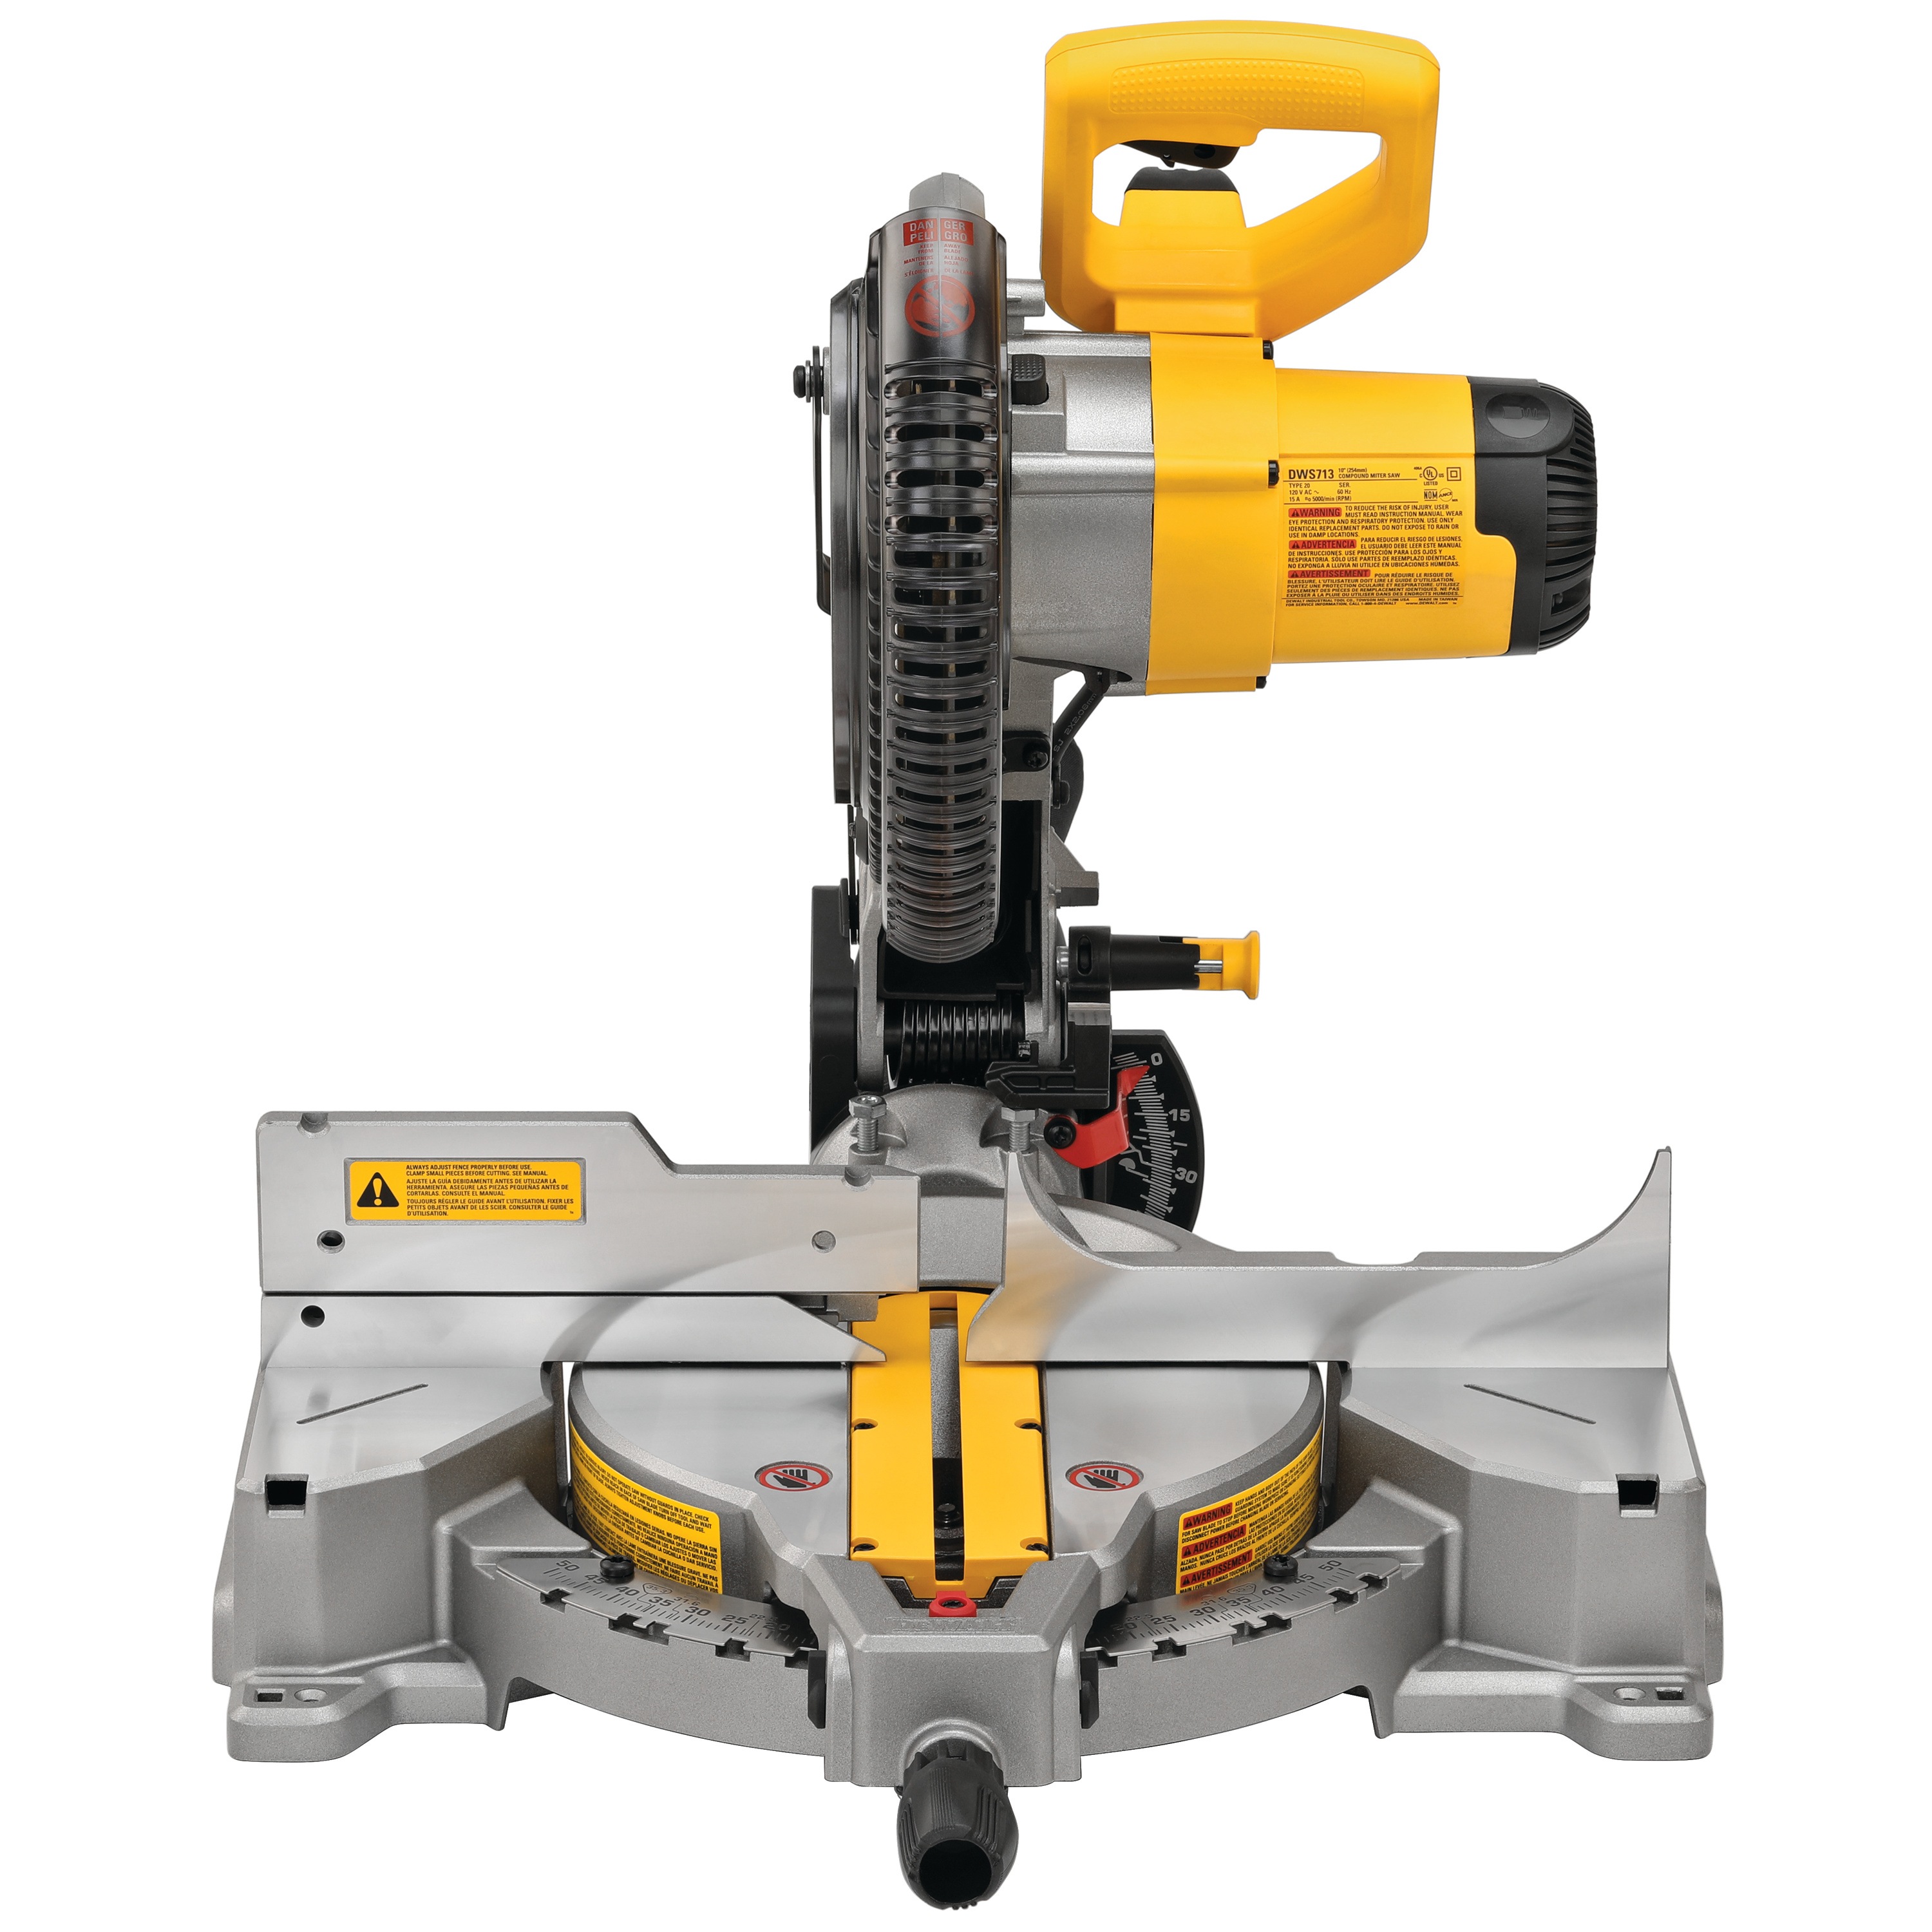 Electric single bevel compound miter saw.